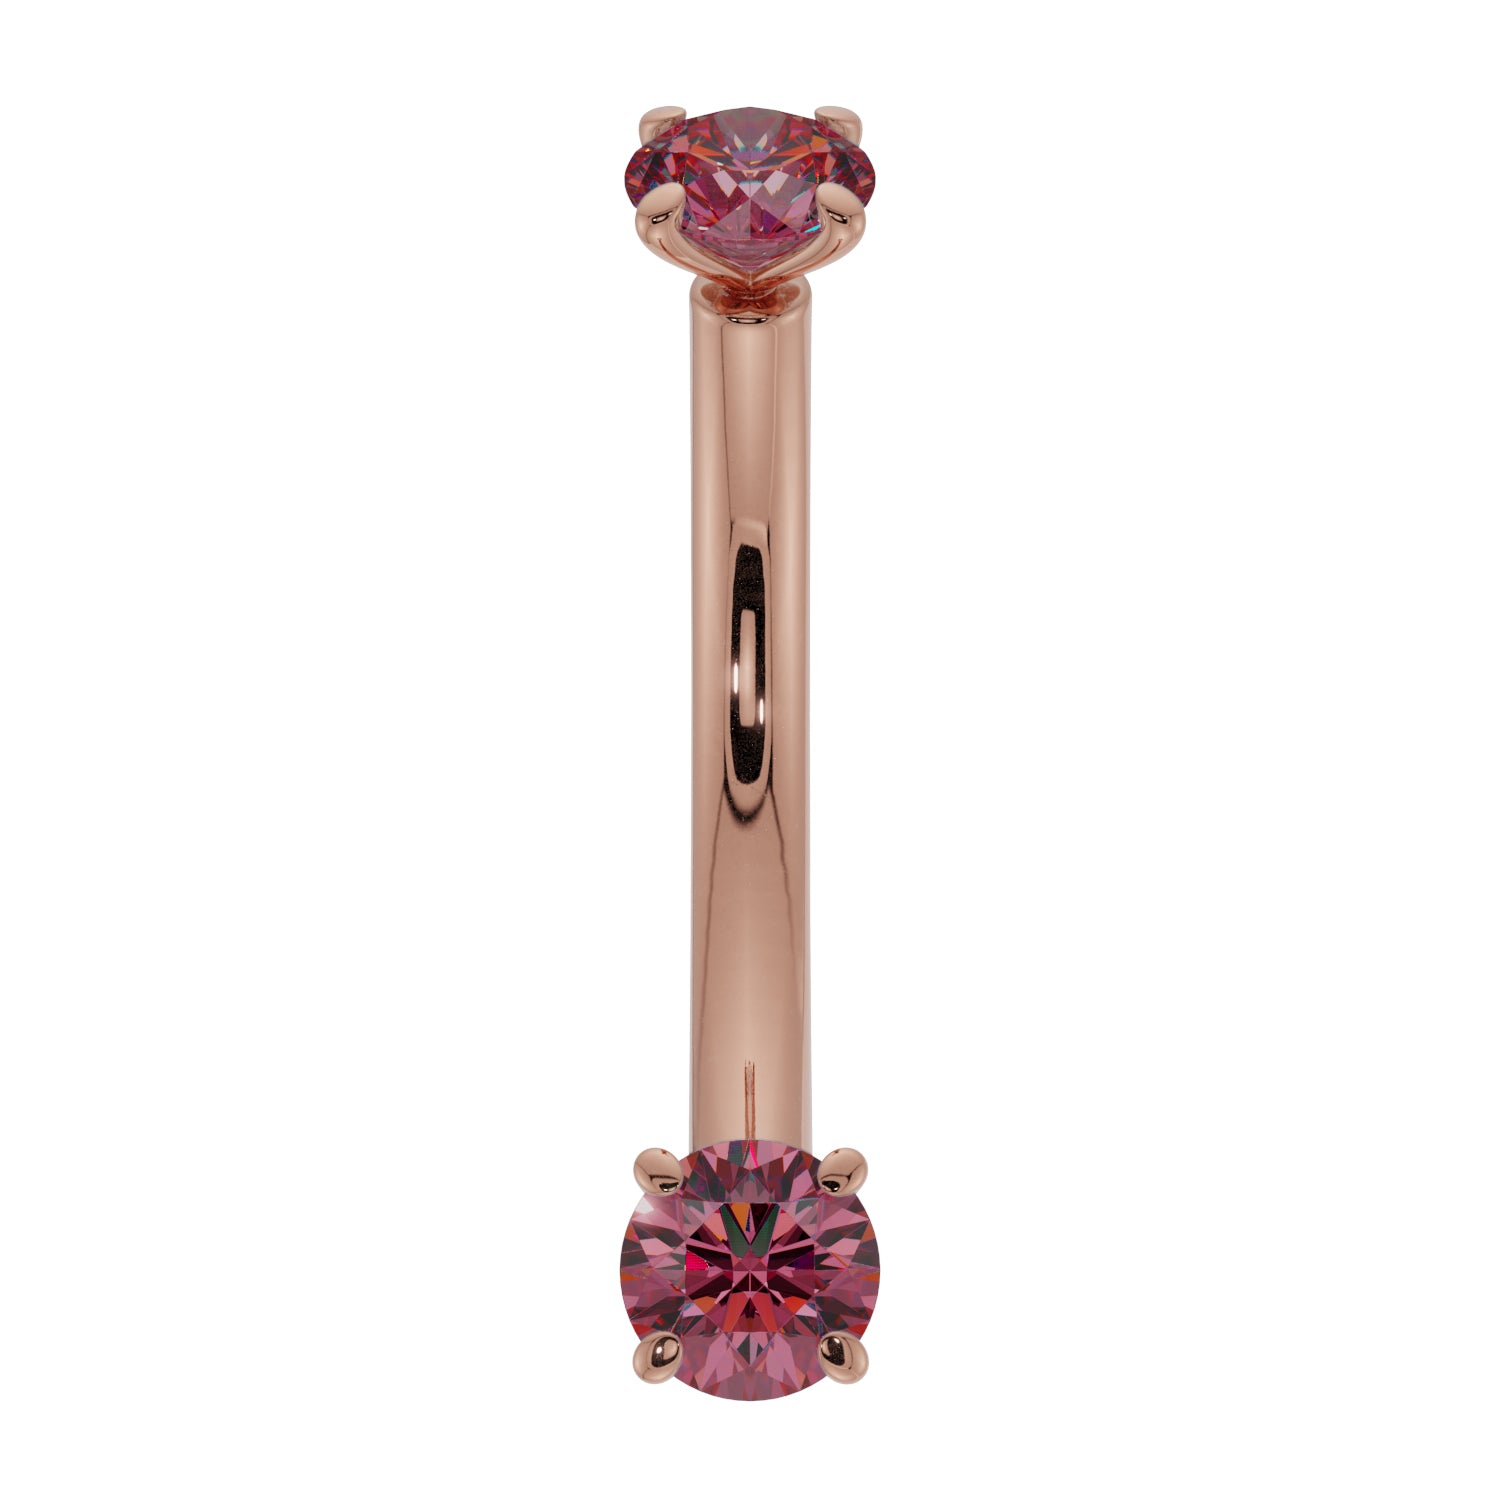 Dainty Ruby Prong-Set Curved Barbell for Eyebrow Rook Belly-14K Rose Gold   16G (1.2mm)   7 16